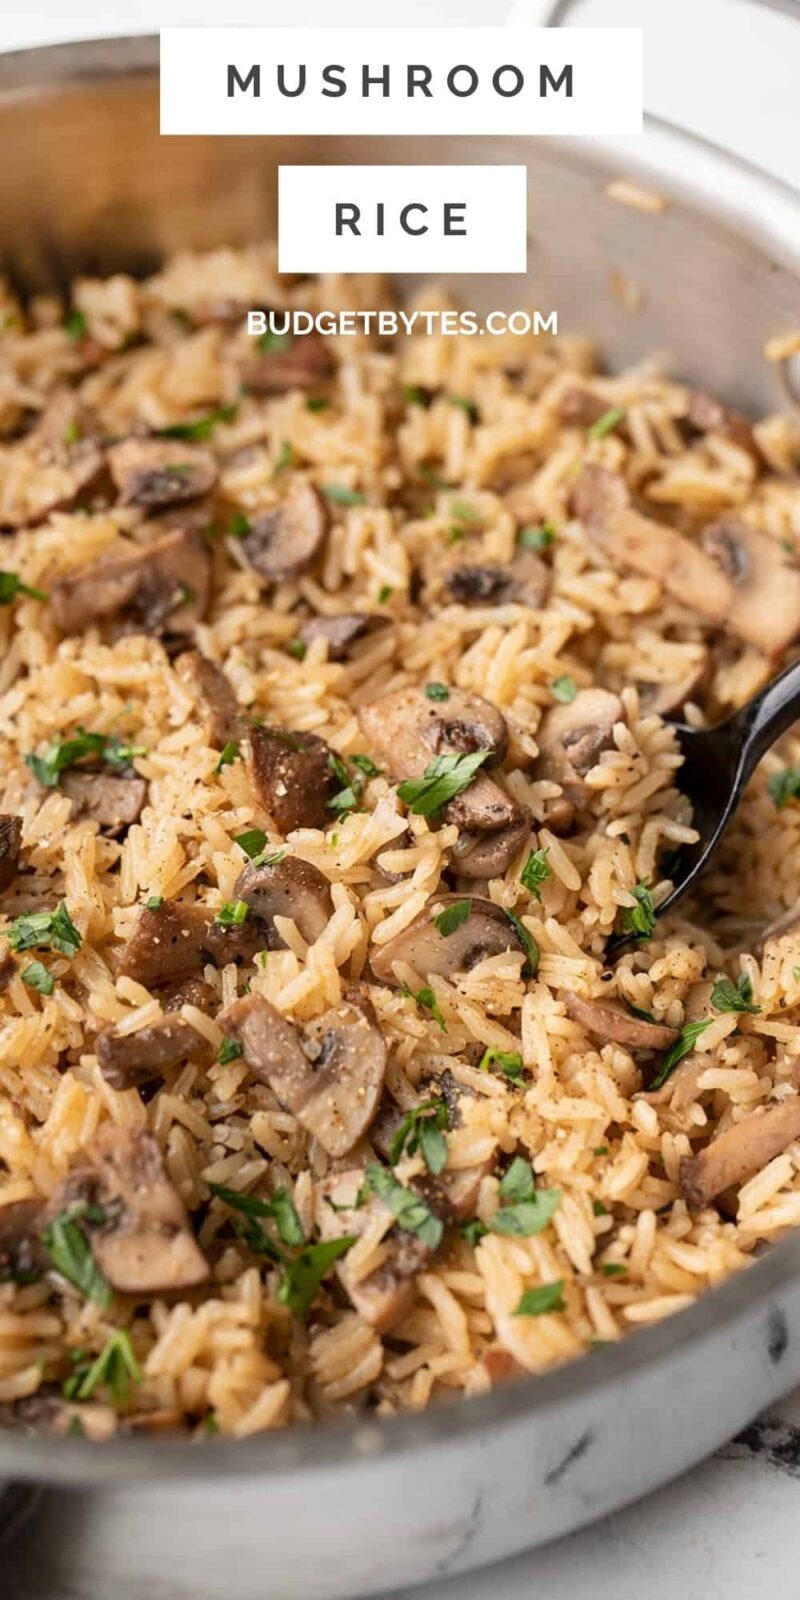 Side view of mushroom rice in a pan, title text at the top